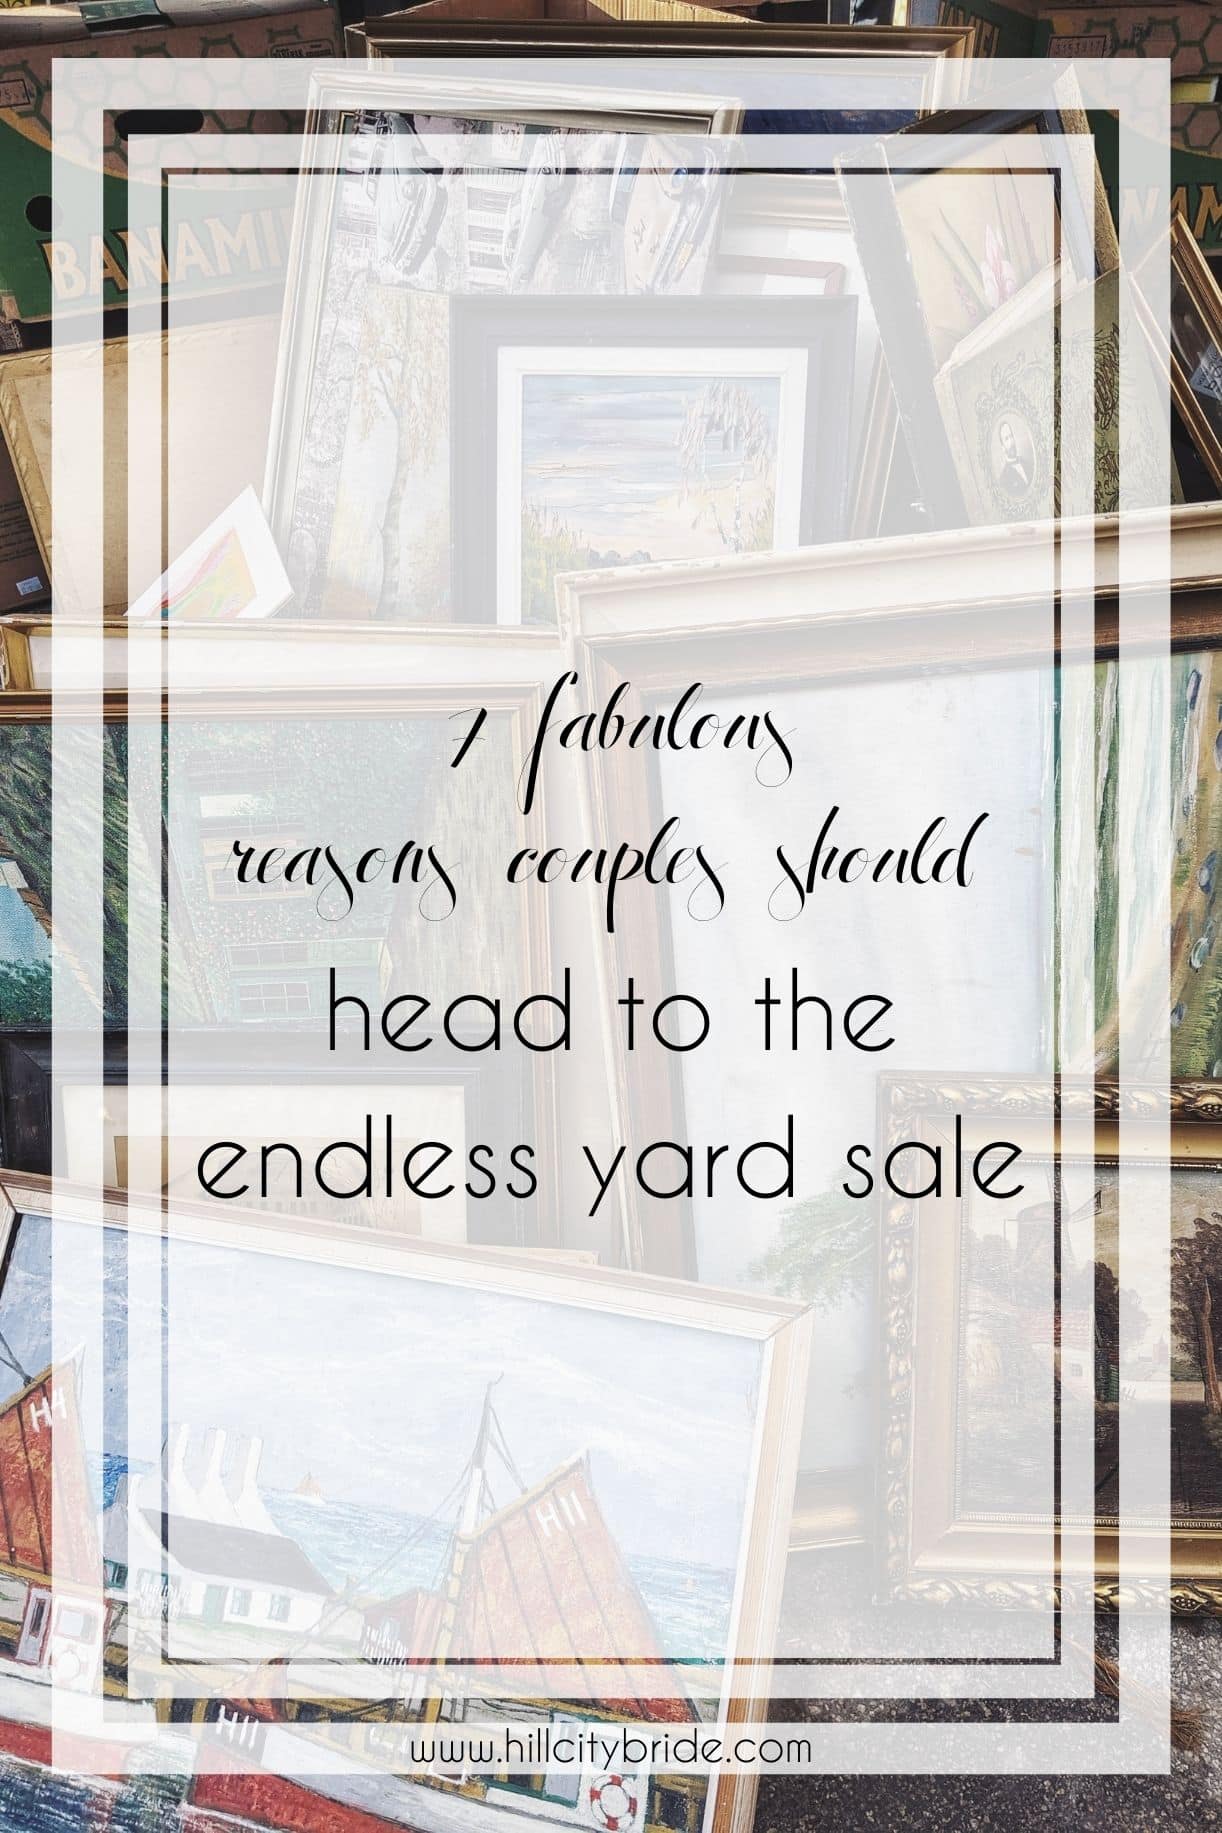 7 Fabulous Reasons Couples Need to Head to the Endless Yard Sale